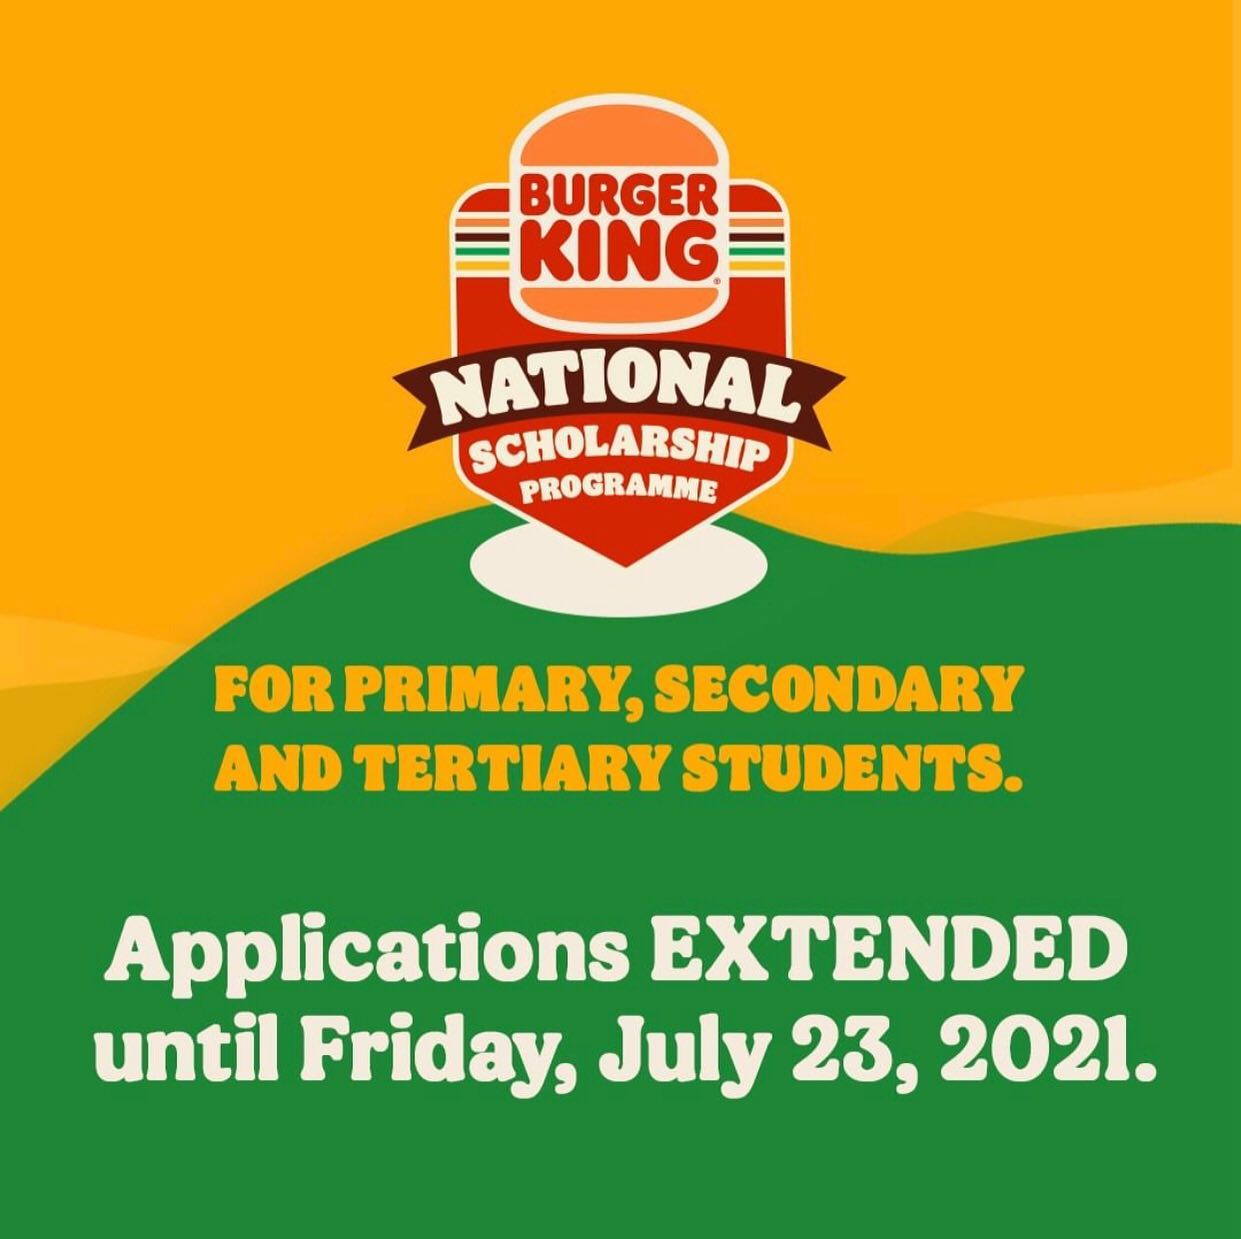 Apply for the Burger King Jamaica National Scholarship Programme for primary, secondary and tertiary students. All applications will be closed Friday, July 23, 2021.